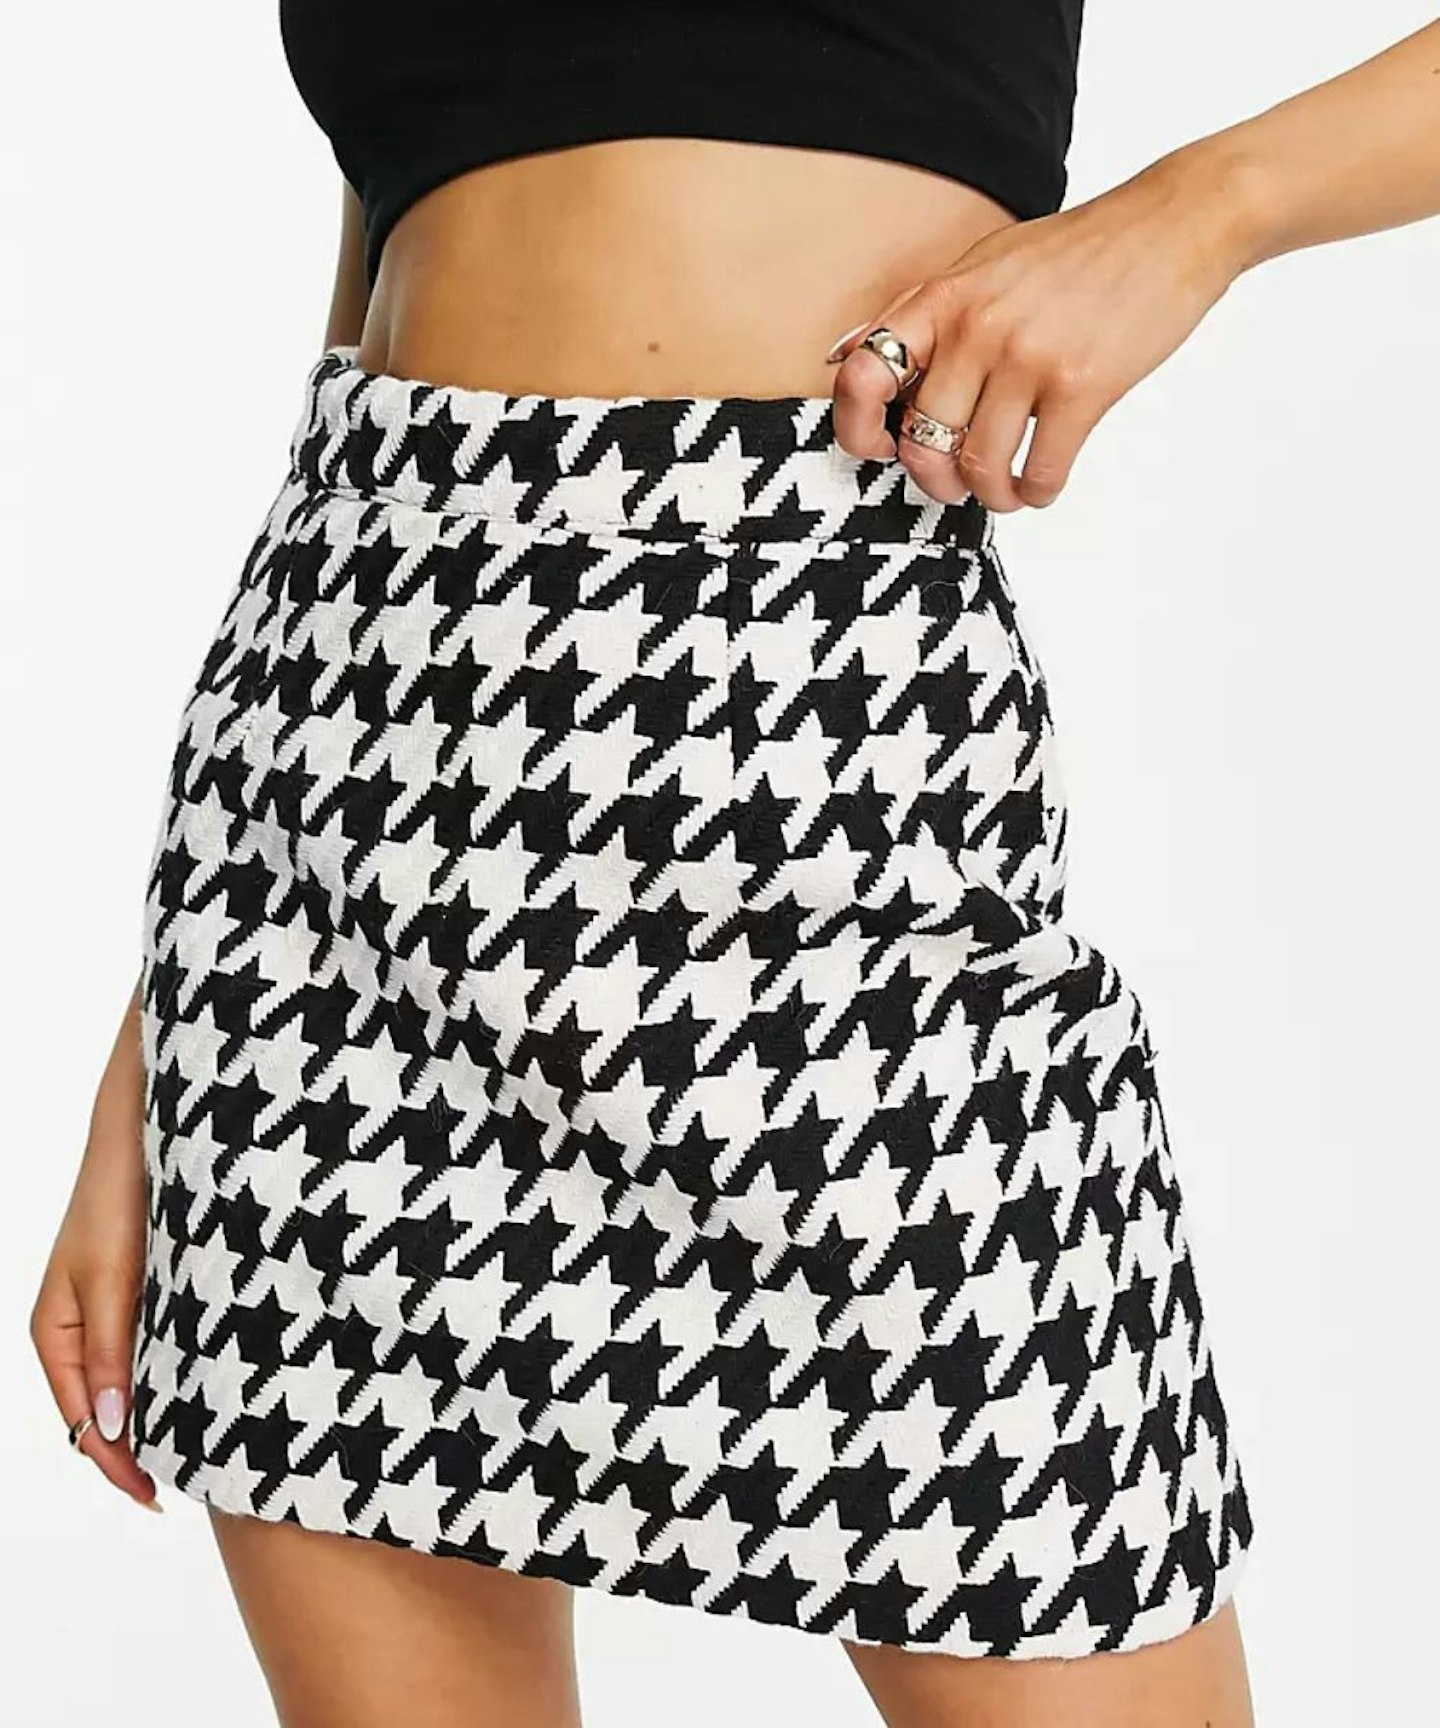 Anna's Monochrome Skirt and Top